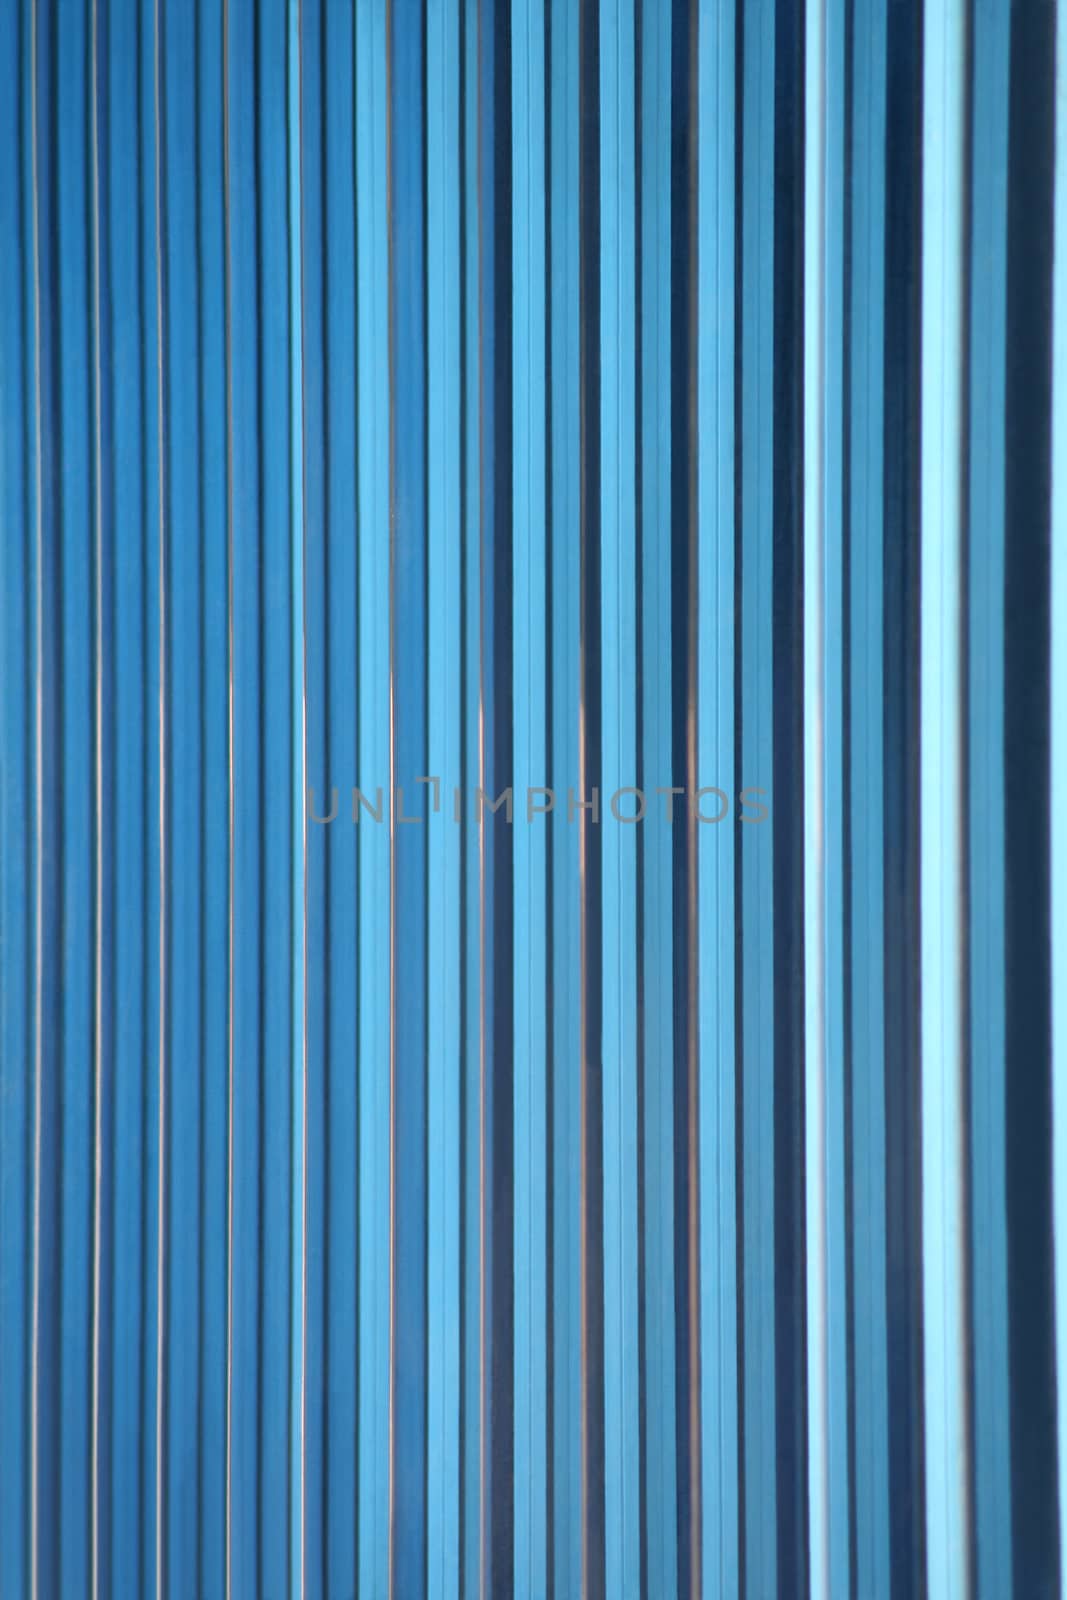 A shot of blue decorative glass tiles partitioning the windows of an office building's facade makes a great gradient background abstract. Vertical version.